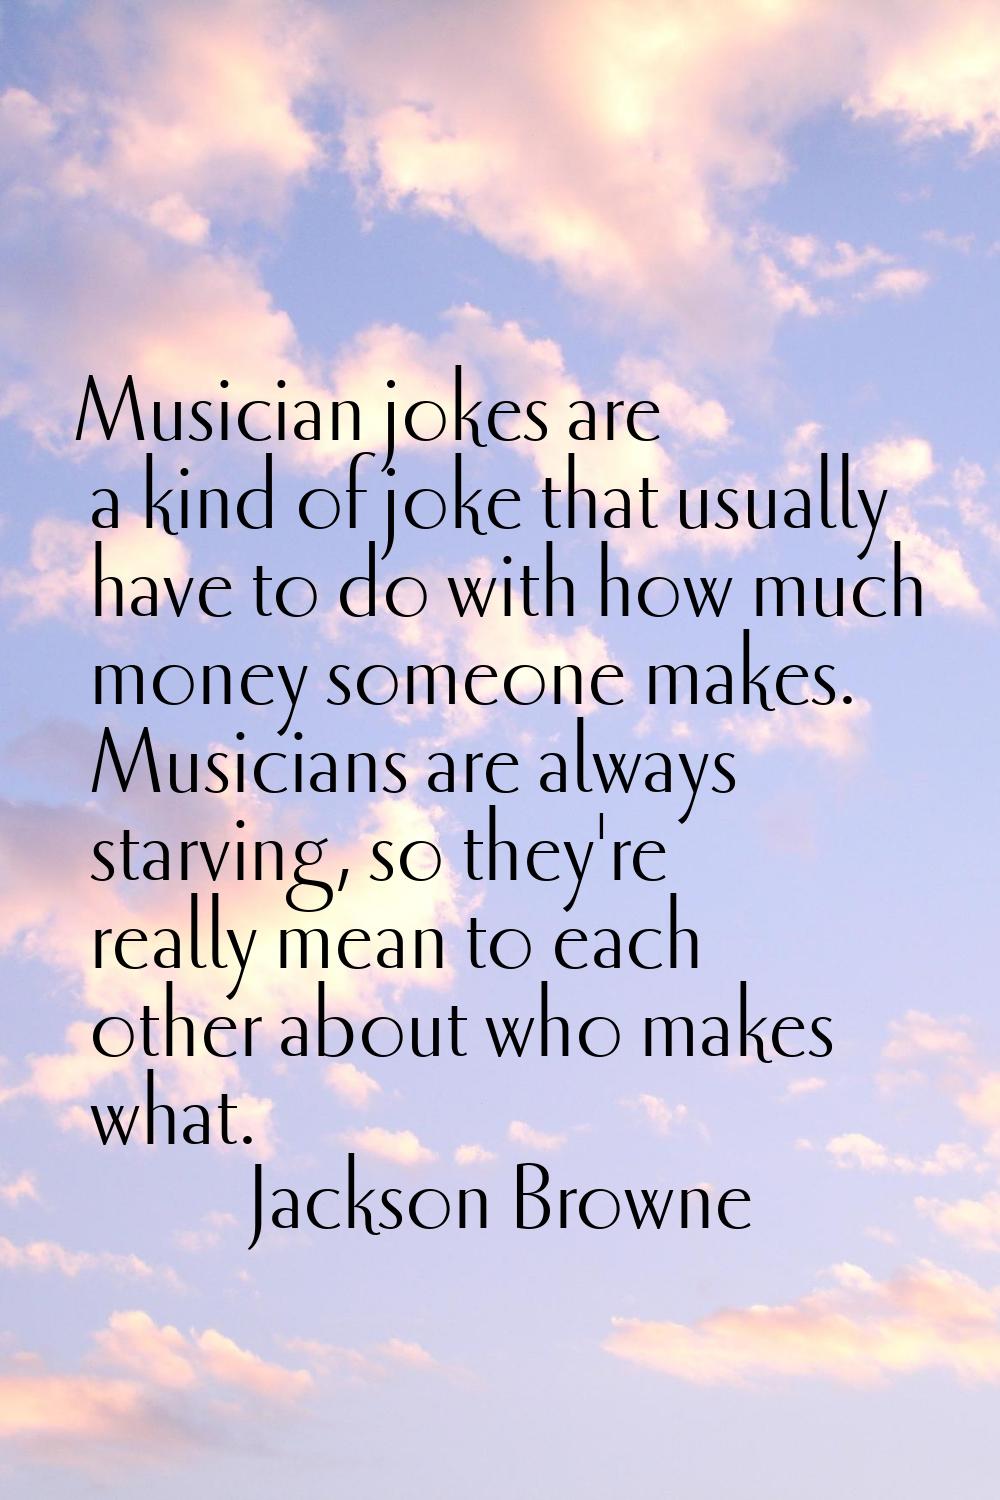 Musician jokes are a kind of joke that usually have to do with how much money someone makes. Musici